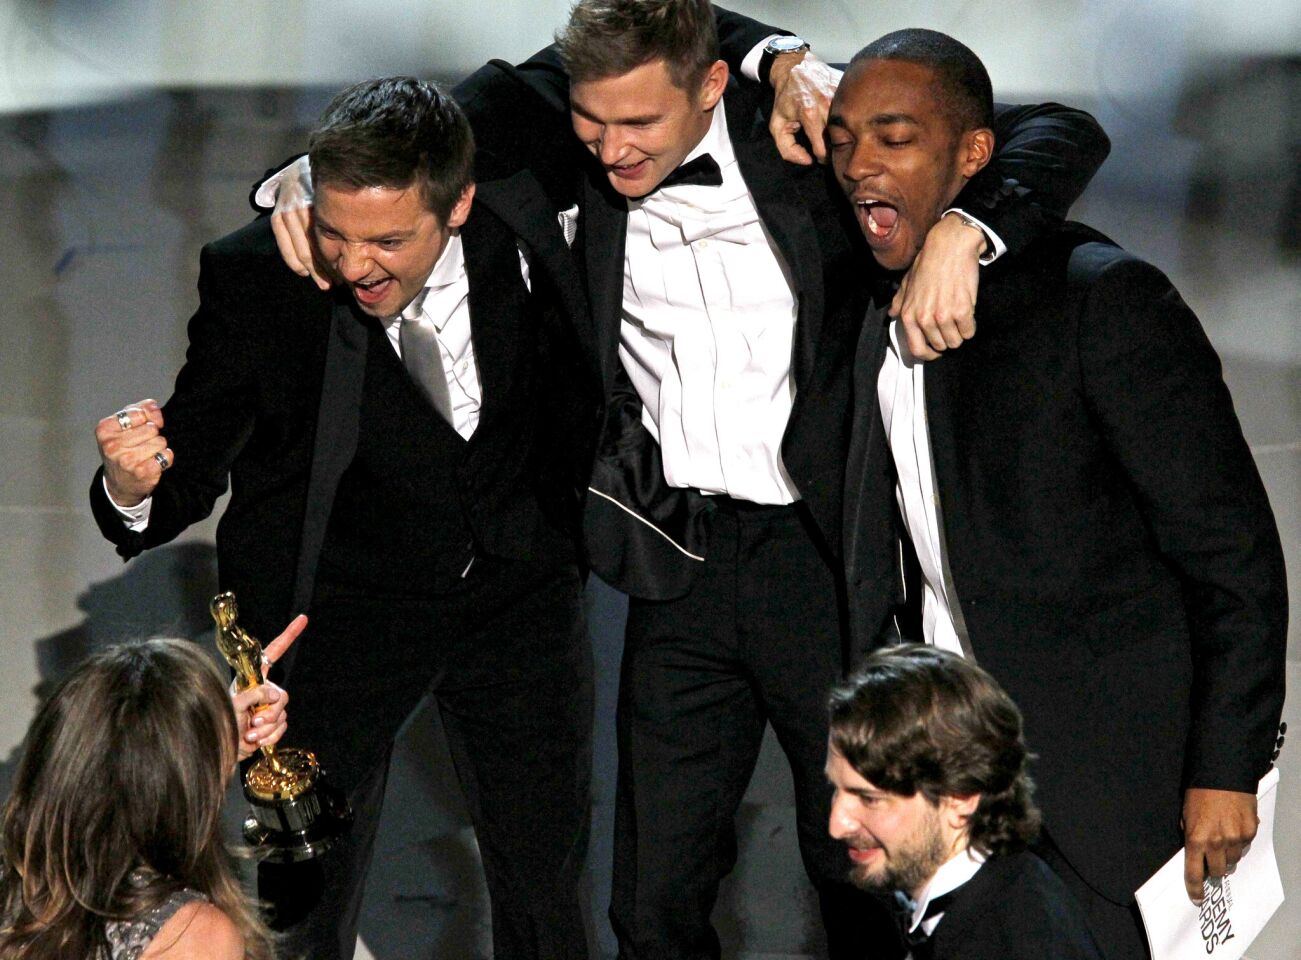 Jeremy Renner, from left, Brian Geraghty and Anthony Mackie of "The Hurt Locker" rejoice after the film in which they co-starred won best picture at the 82nd Academy Awards. Screenwriter Mark Boal is at lower right.